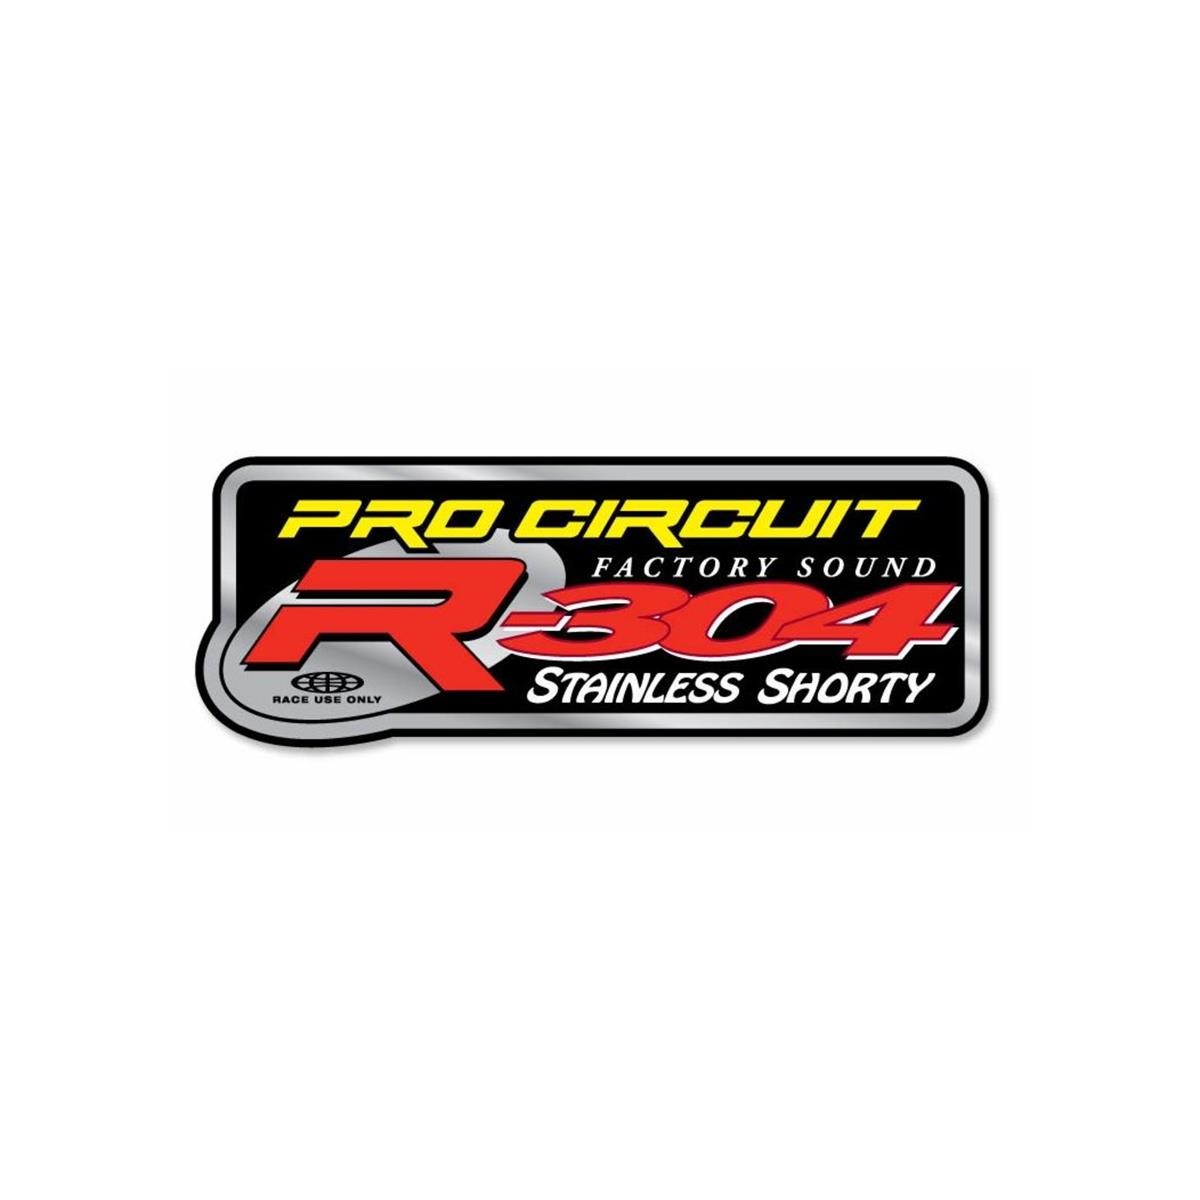 Pro Circuit Silencer Decal  R-304 Factory Sound Shorty